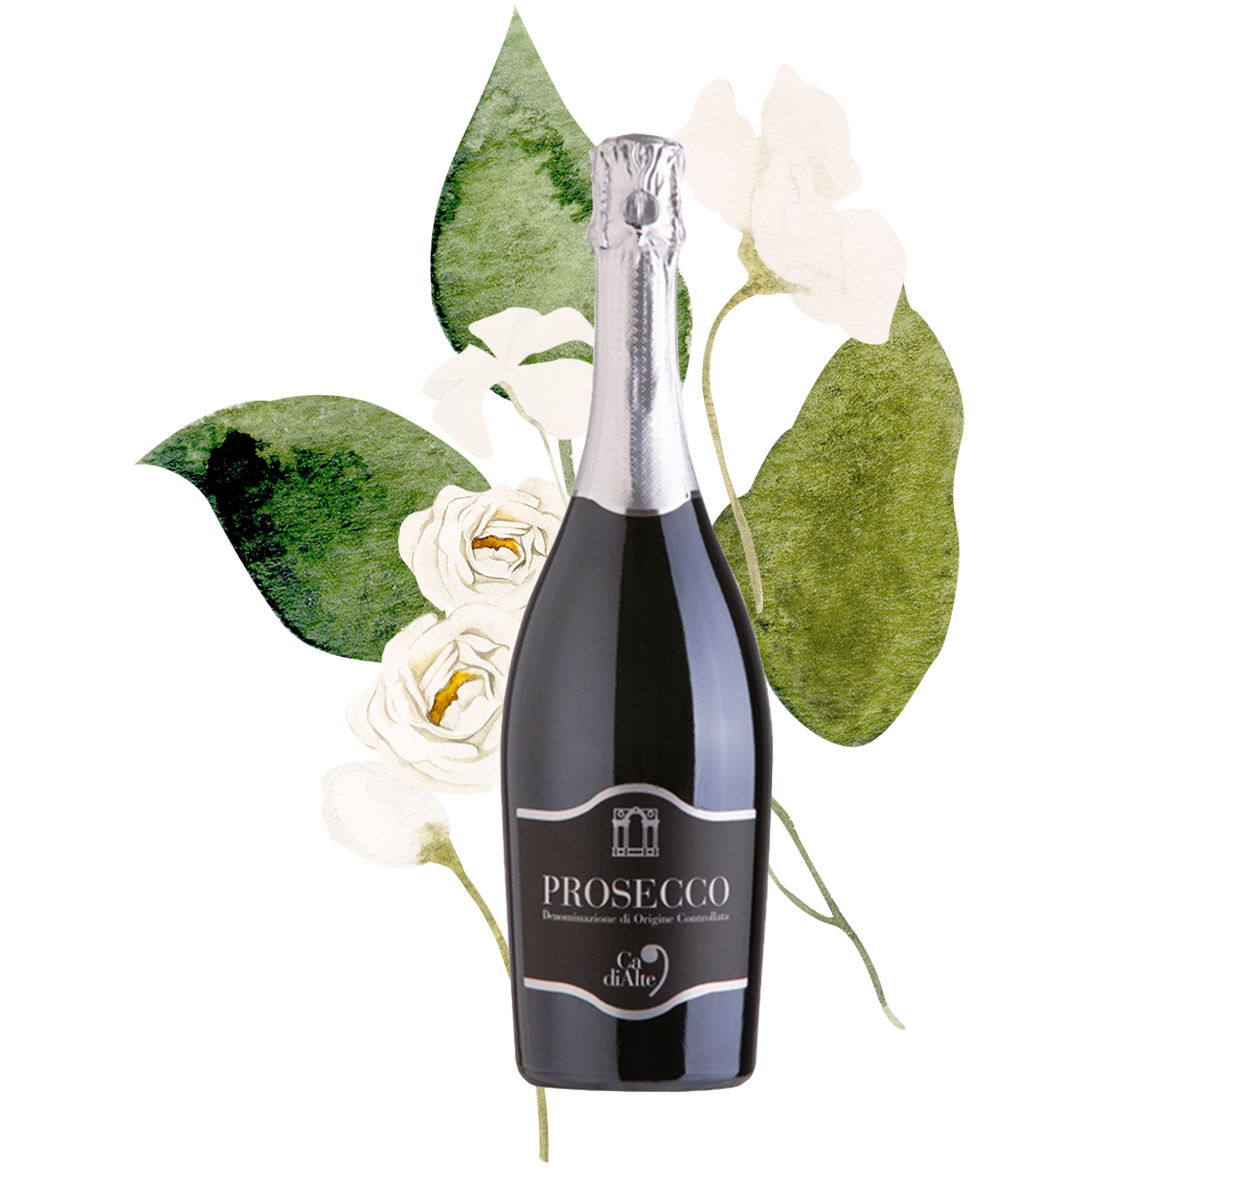 Prosecco Spumante Extra Dry with floral decoration in creams and greens